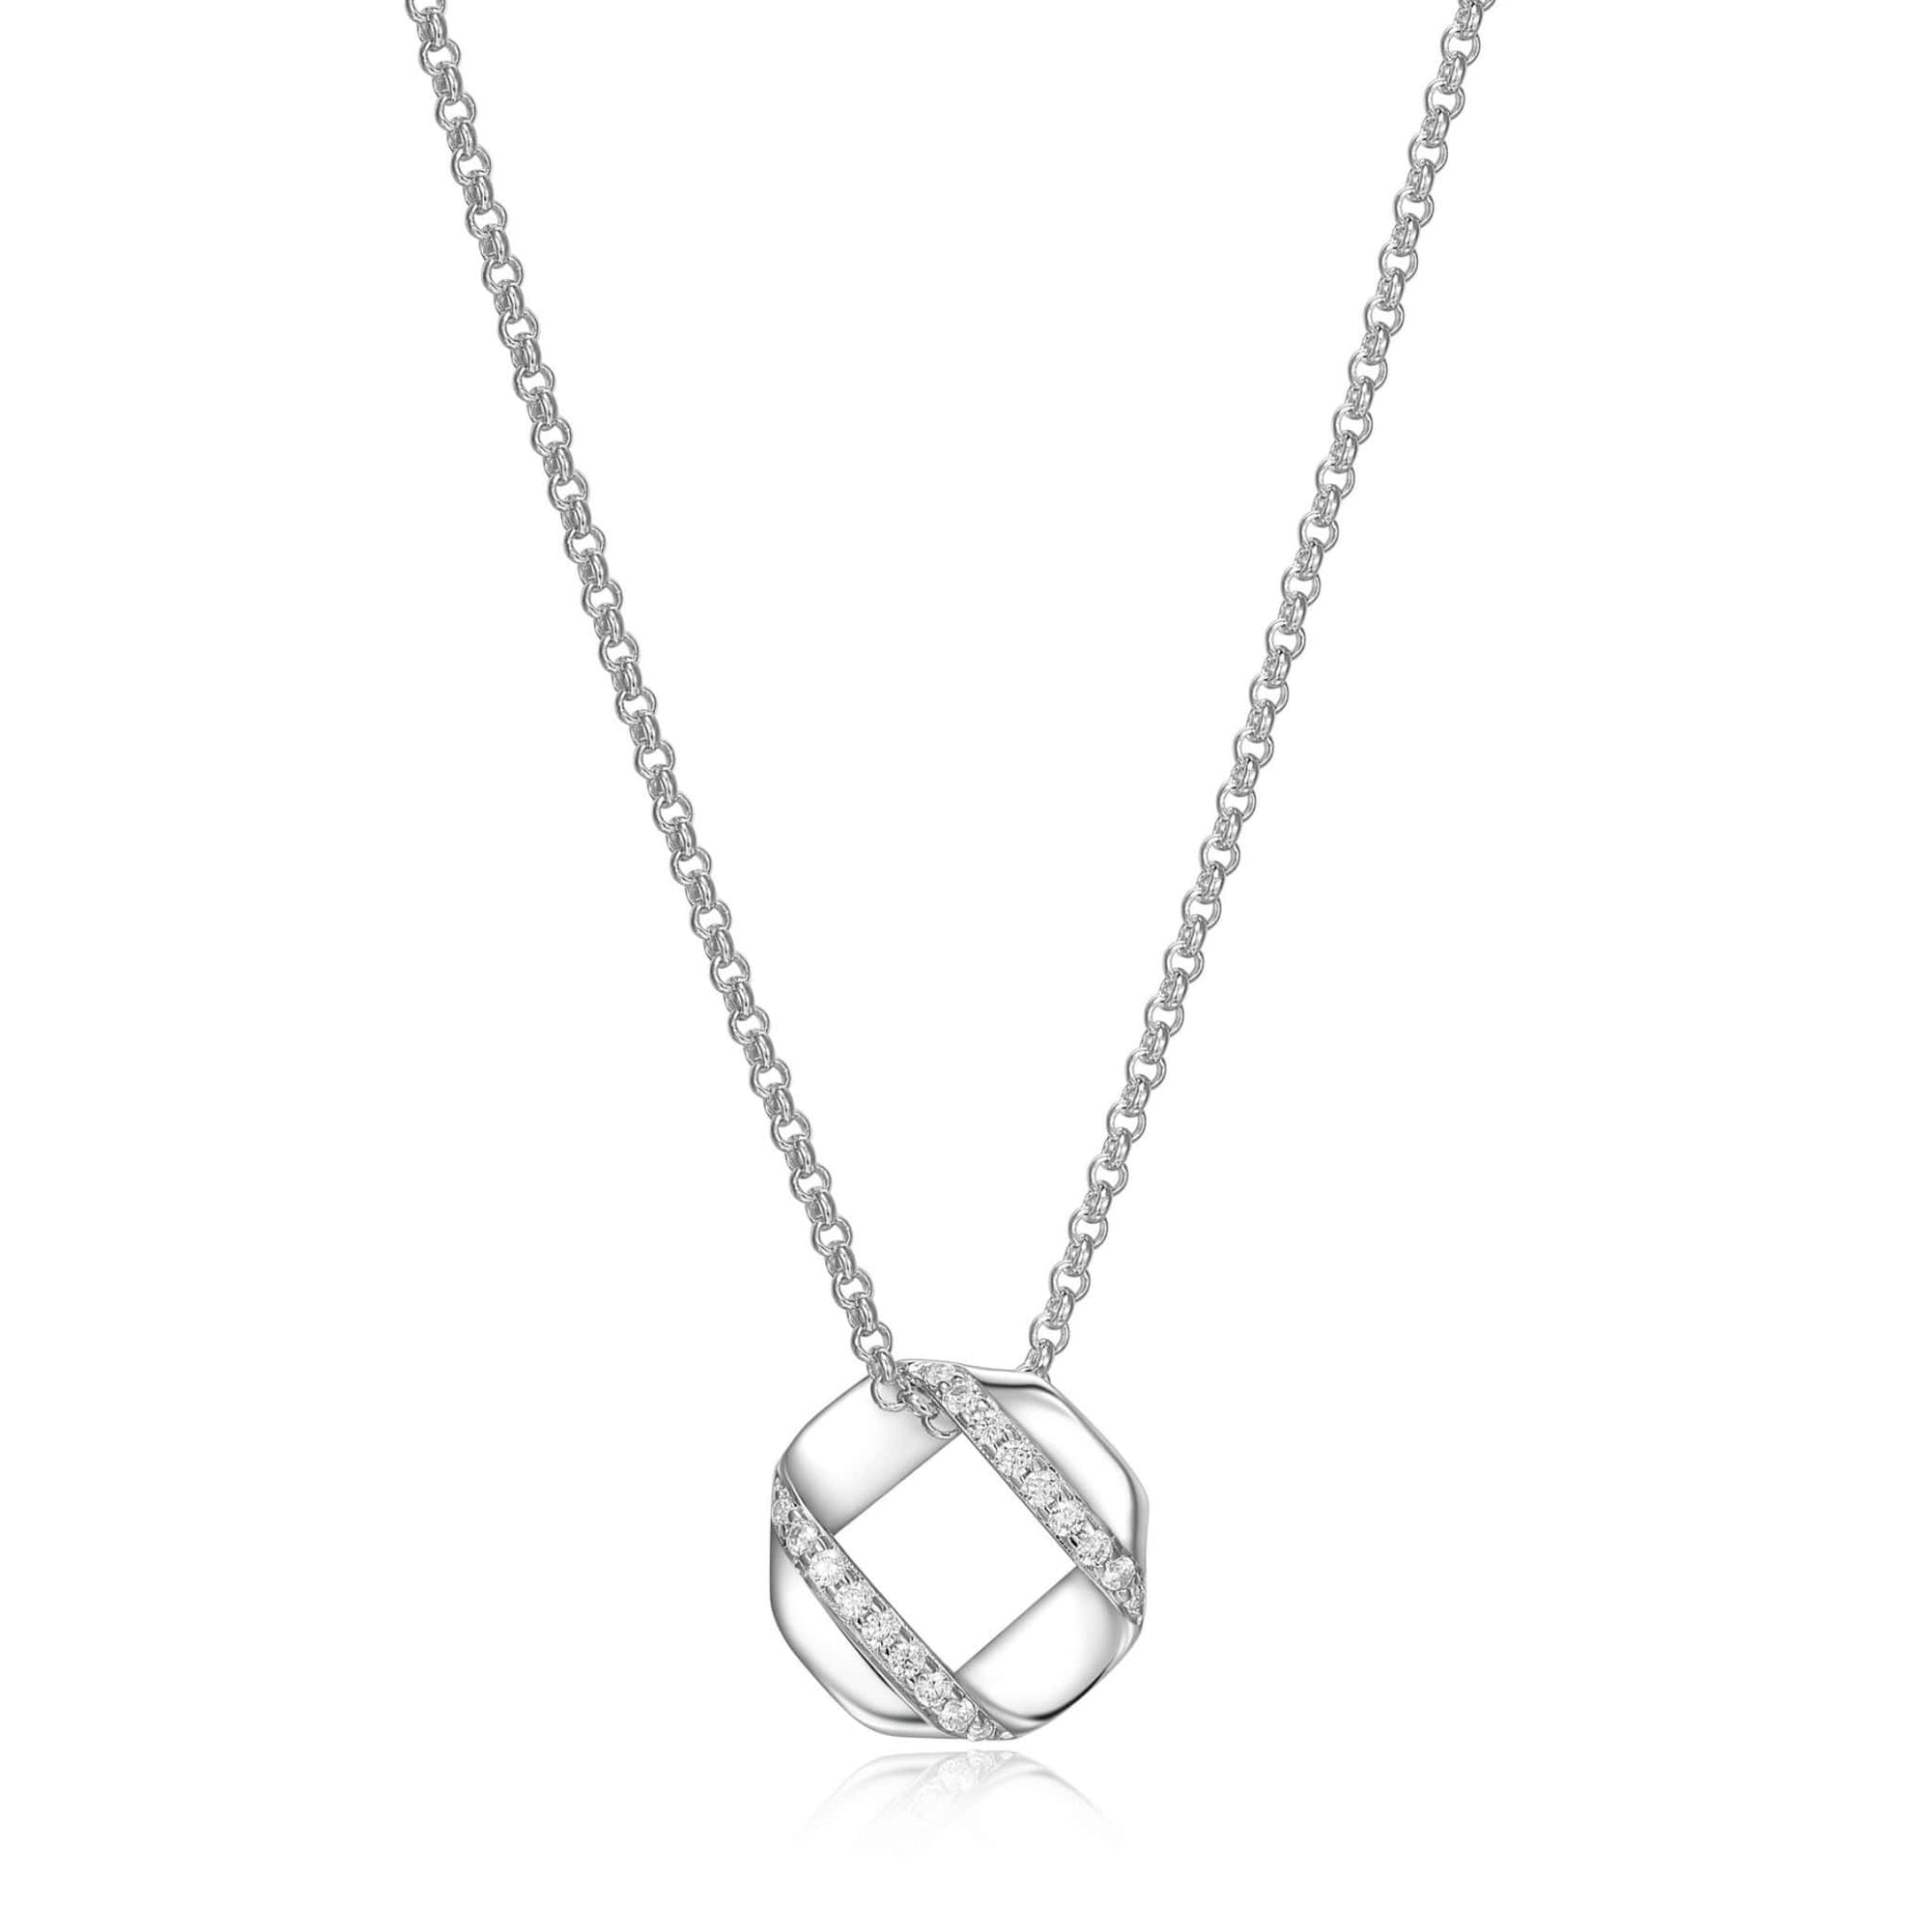 Copy of ELLE "Lattice" Silver Necklace at Arman's Jewellers 